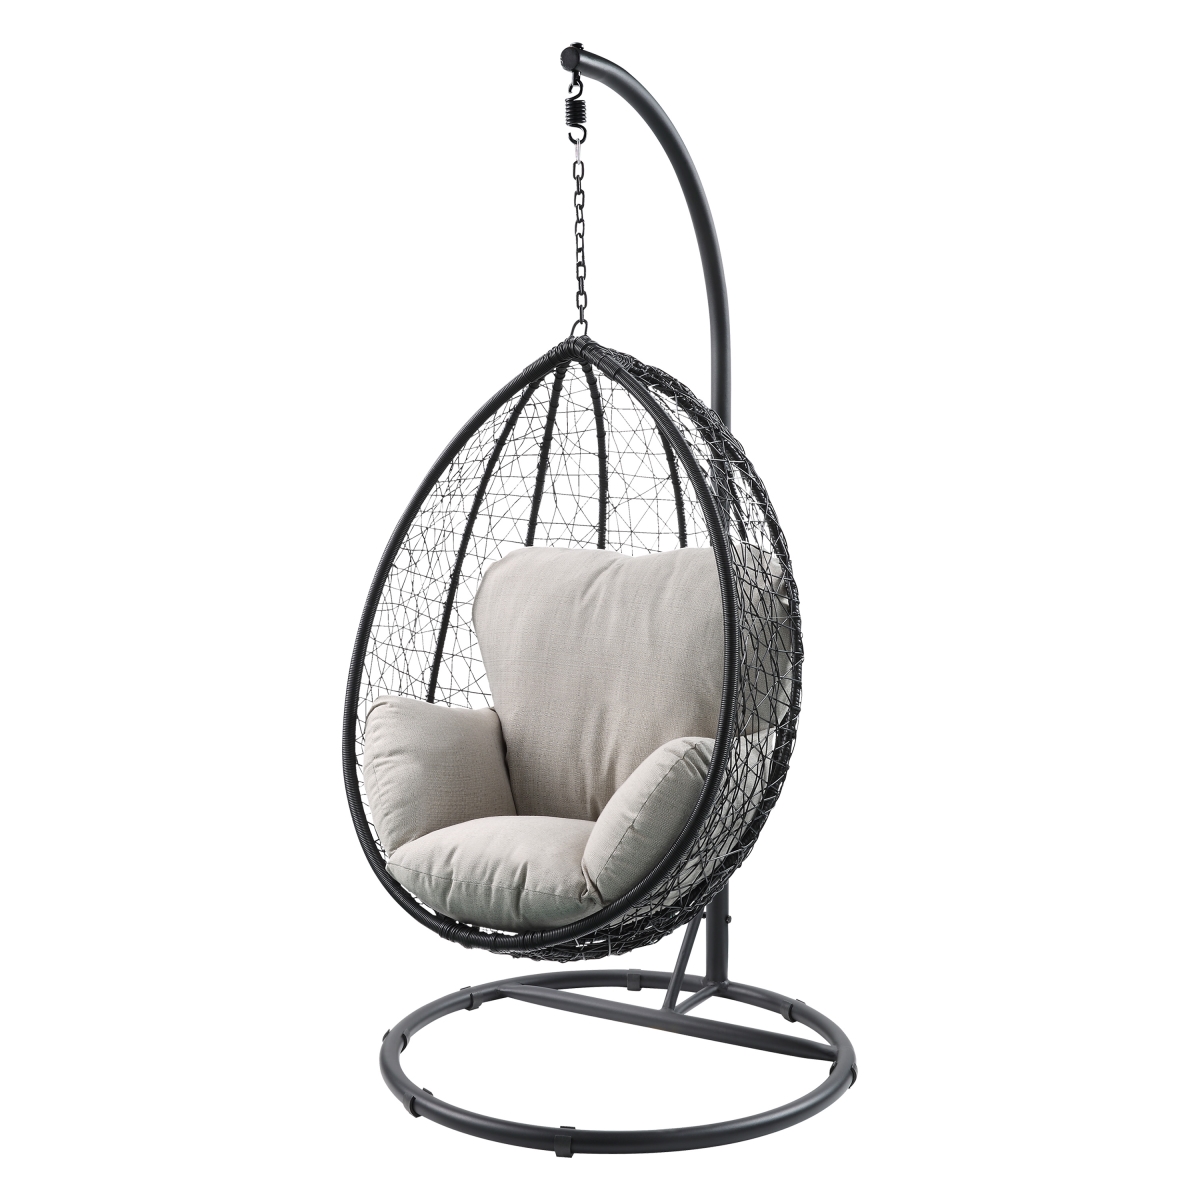 Home Roots 318800 Patio Swing Chair With Stand - Synthetic Wicker, Steel, Polyester & Foam, Beige Fabric & Black Wicker